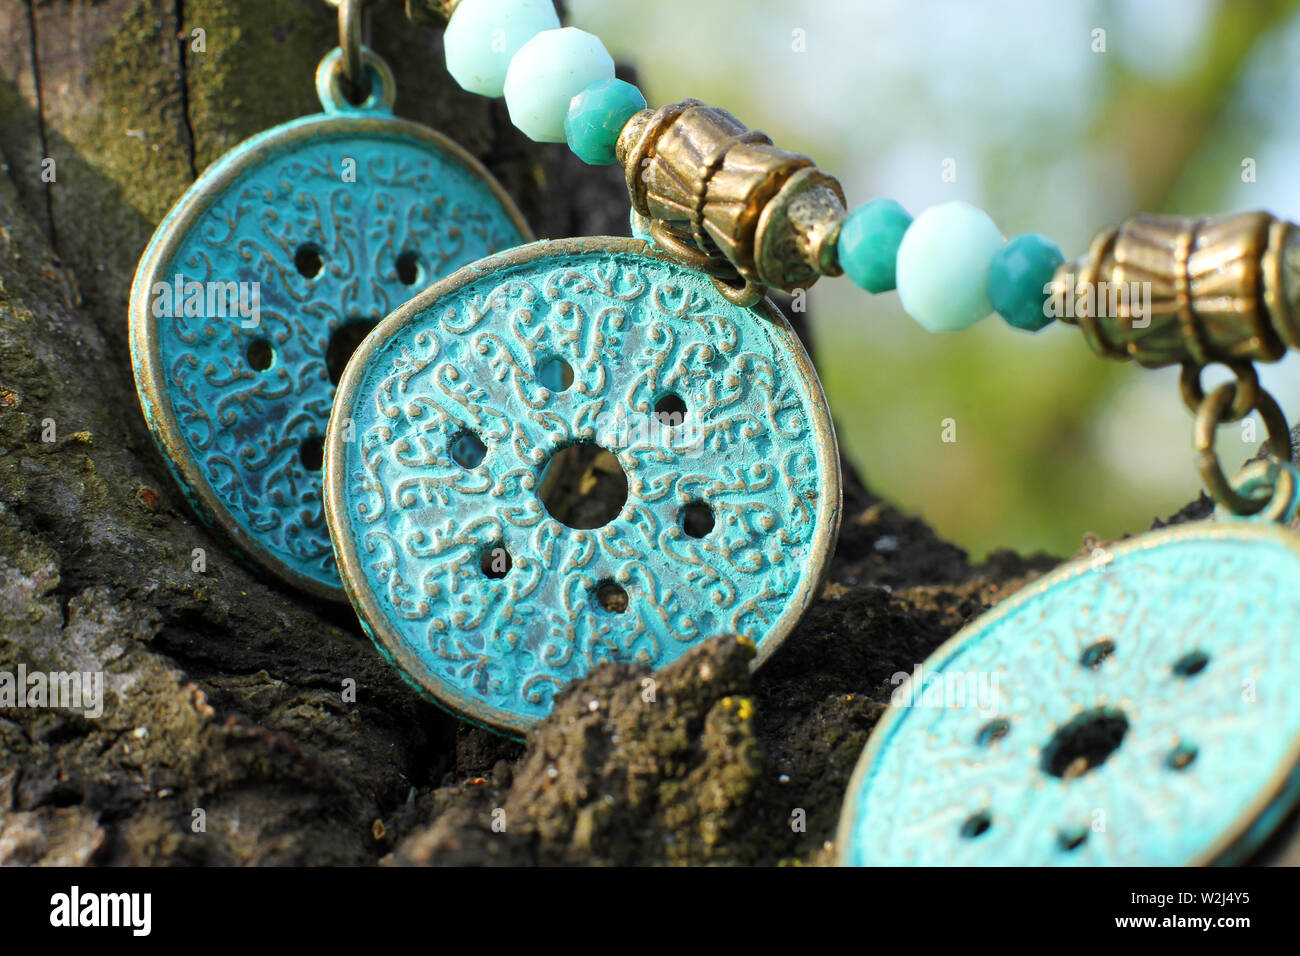 Handmade metal necklace on the nature background ethnical style Stock Photo